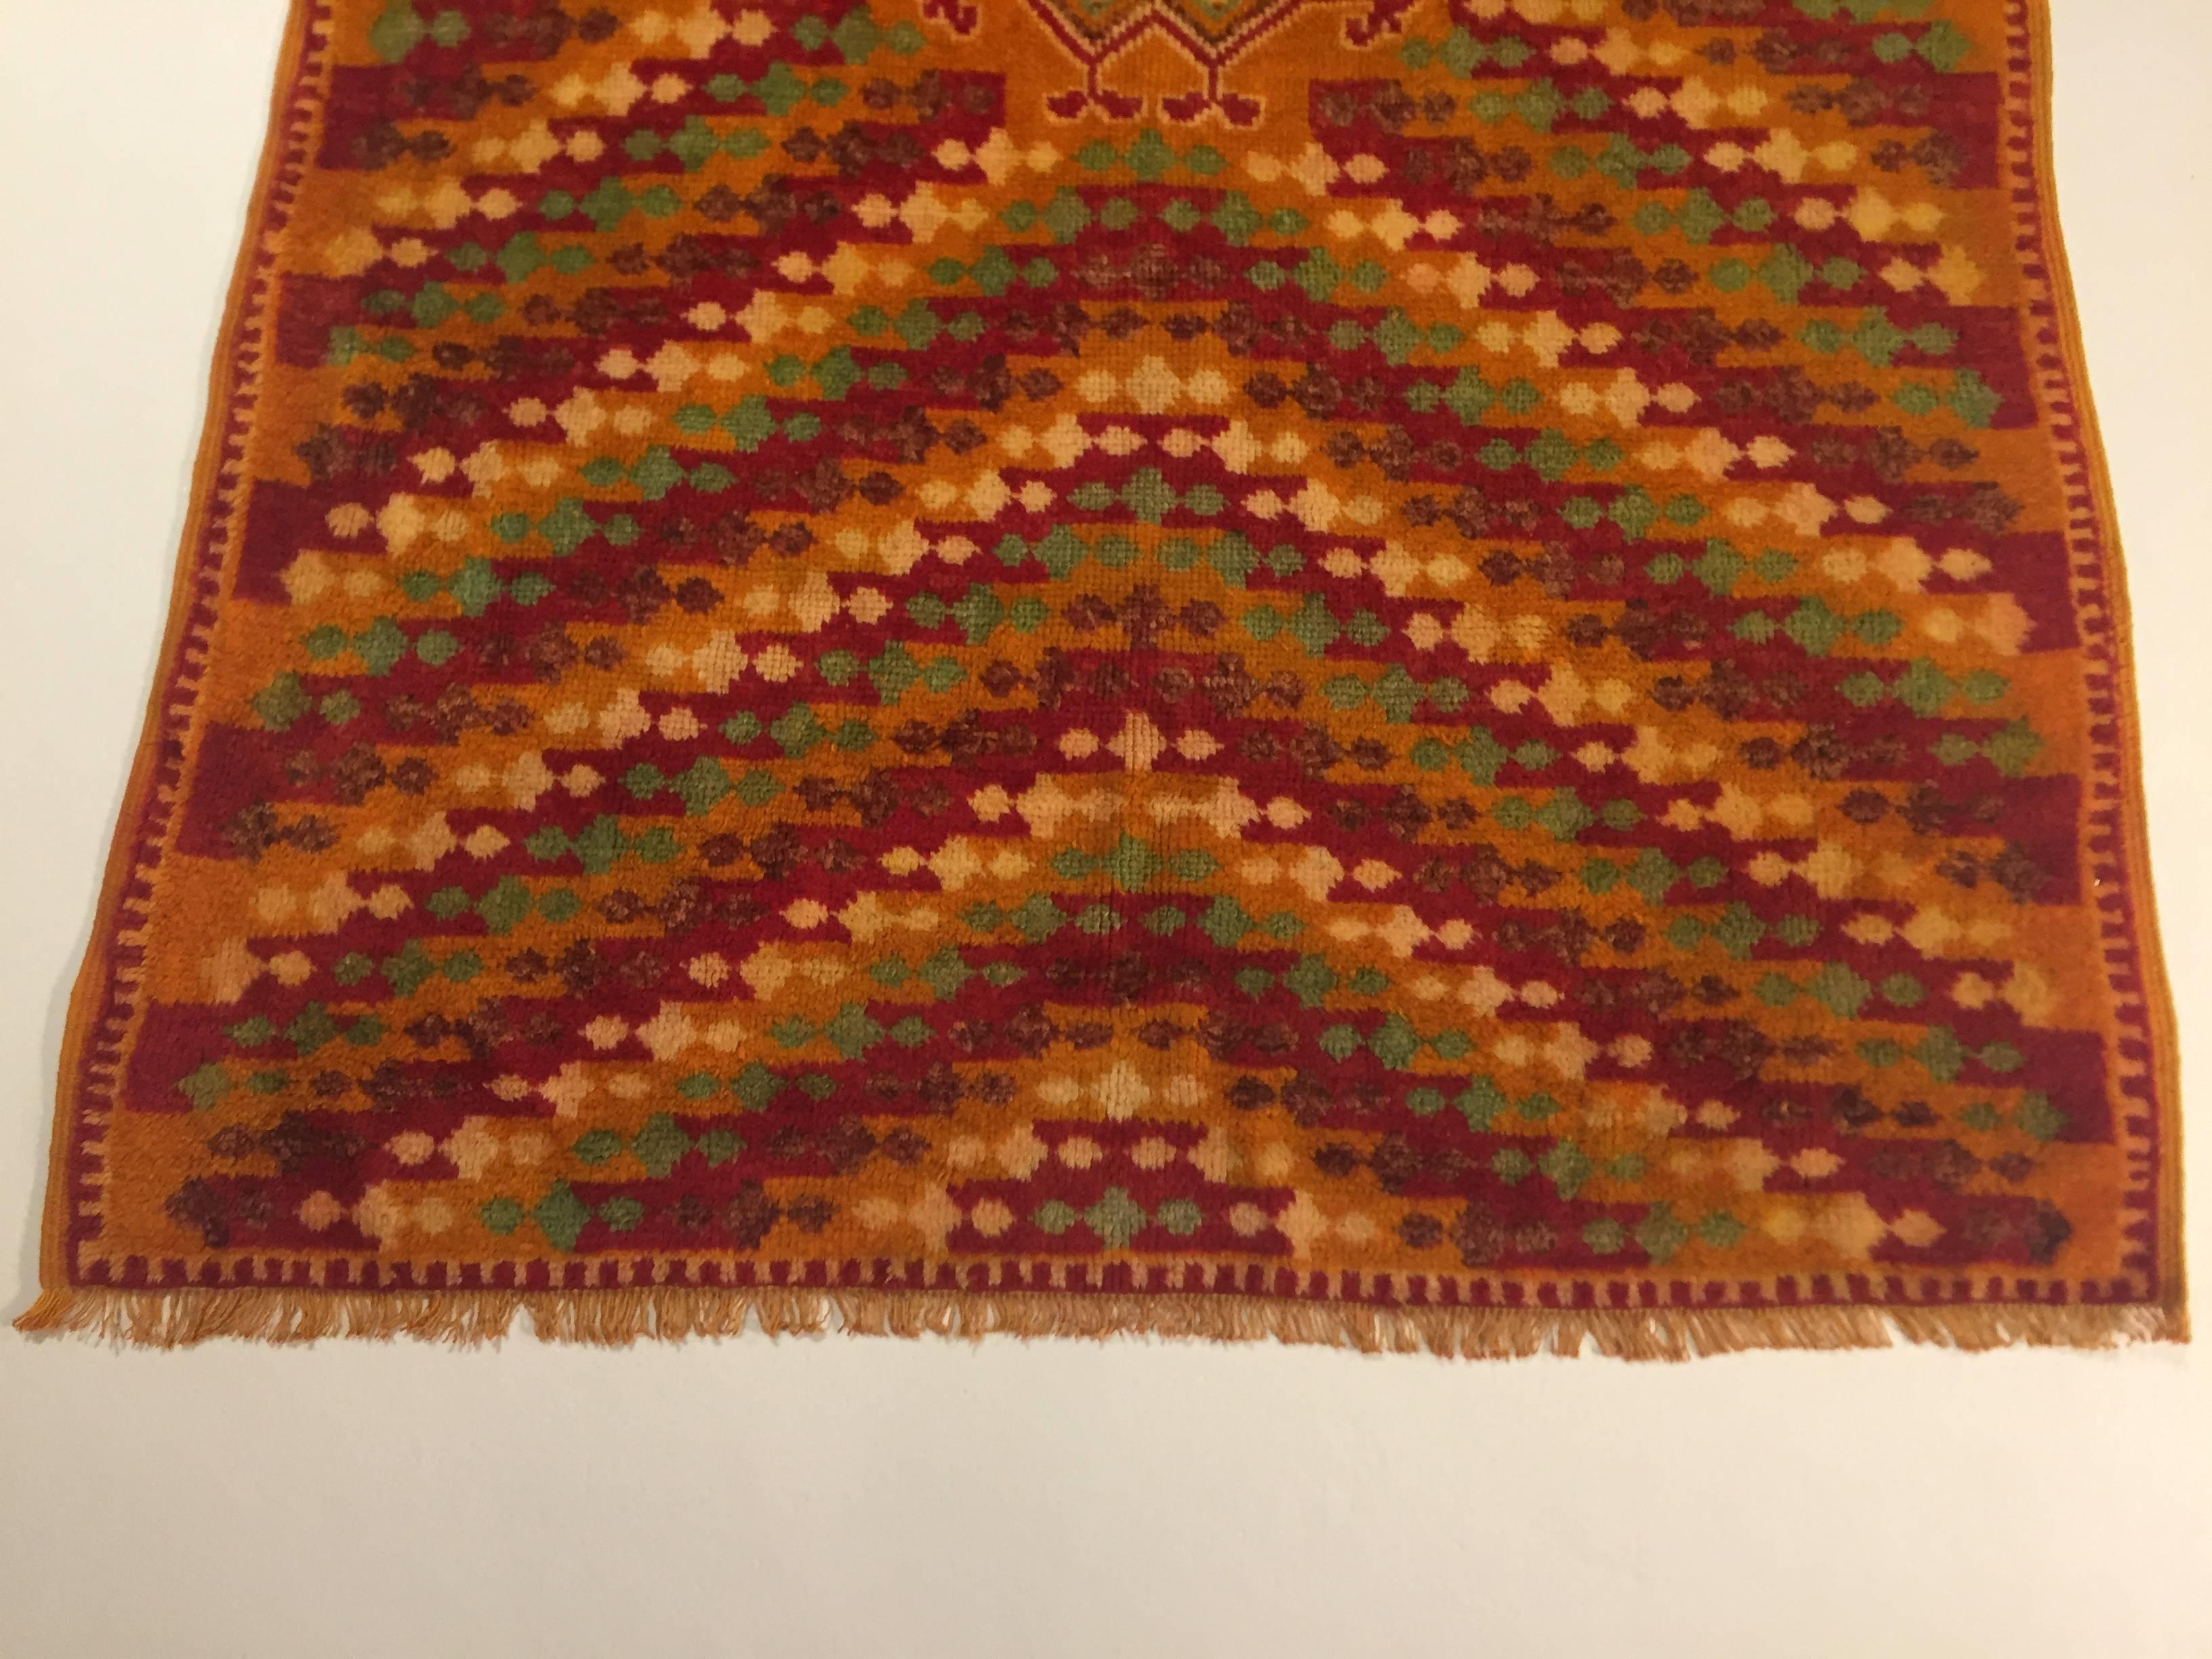 1970 Berber Tribal Moroccan Hand-Knotted Rug Yellow Red Long and Narrow For Sale 7